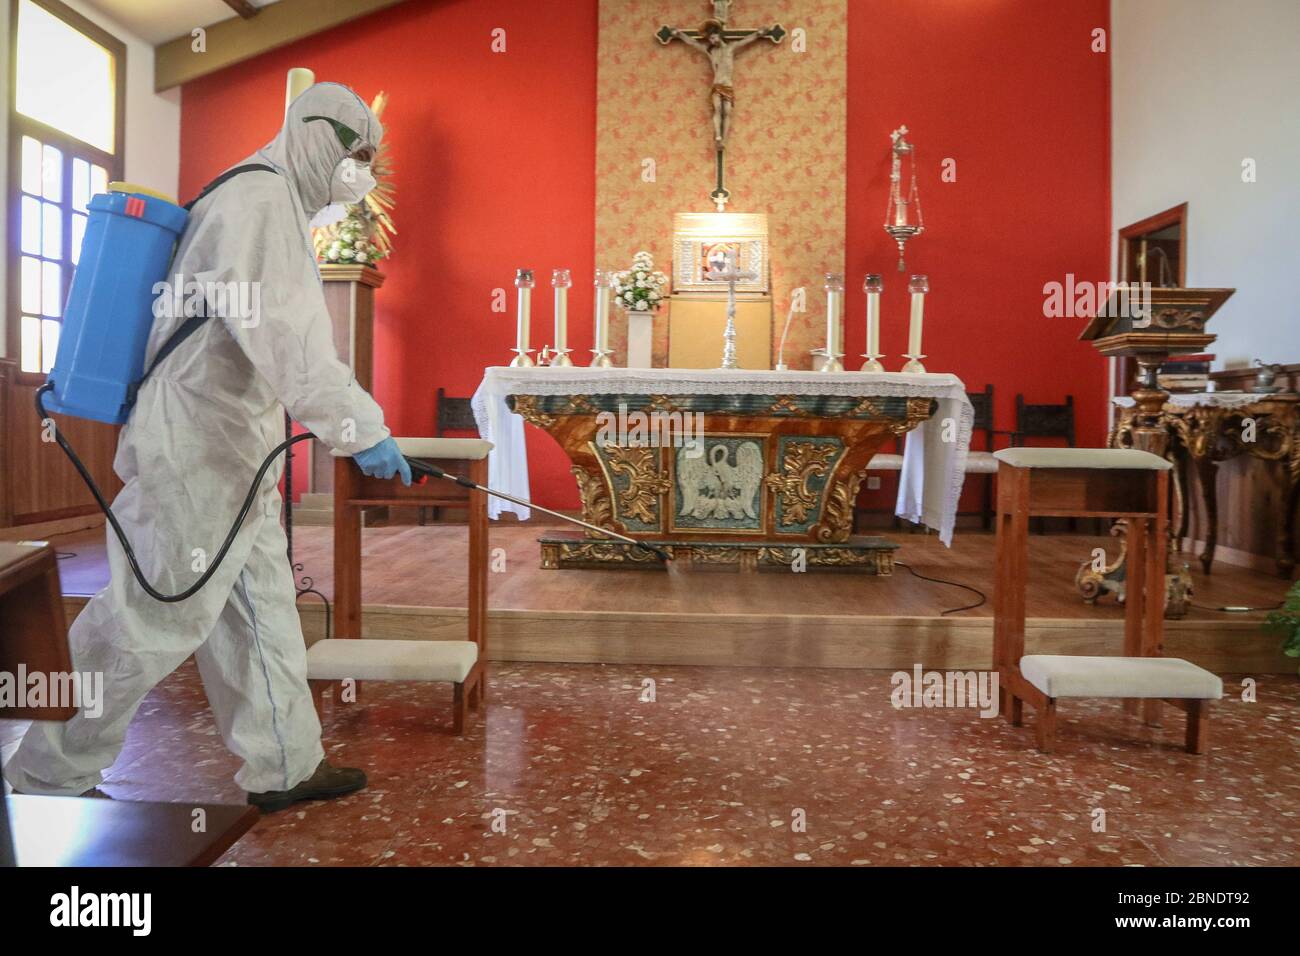 May 14, 2020: 14 May 2020 (Malaga) The disinfection company Fearral carries out cleaning and disinfection work in the Church of Santa MarÃ-a Inmaculada in Torre de BenagalbÃ³n del RincÃ³n de la Victoria altruistically due to the coronavirus crisis Credit: Lorenzo Carnero/ZUMA Wire/Alamy Live News Stock Photo